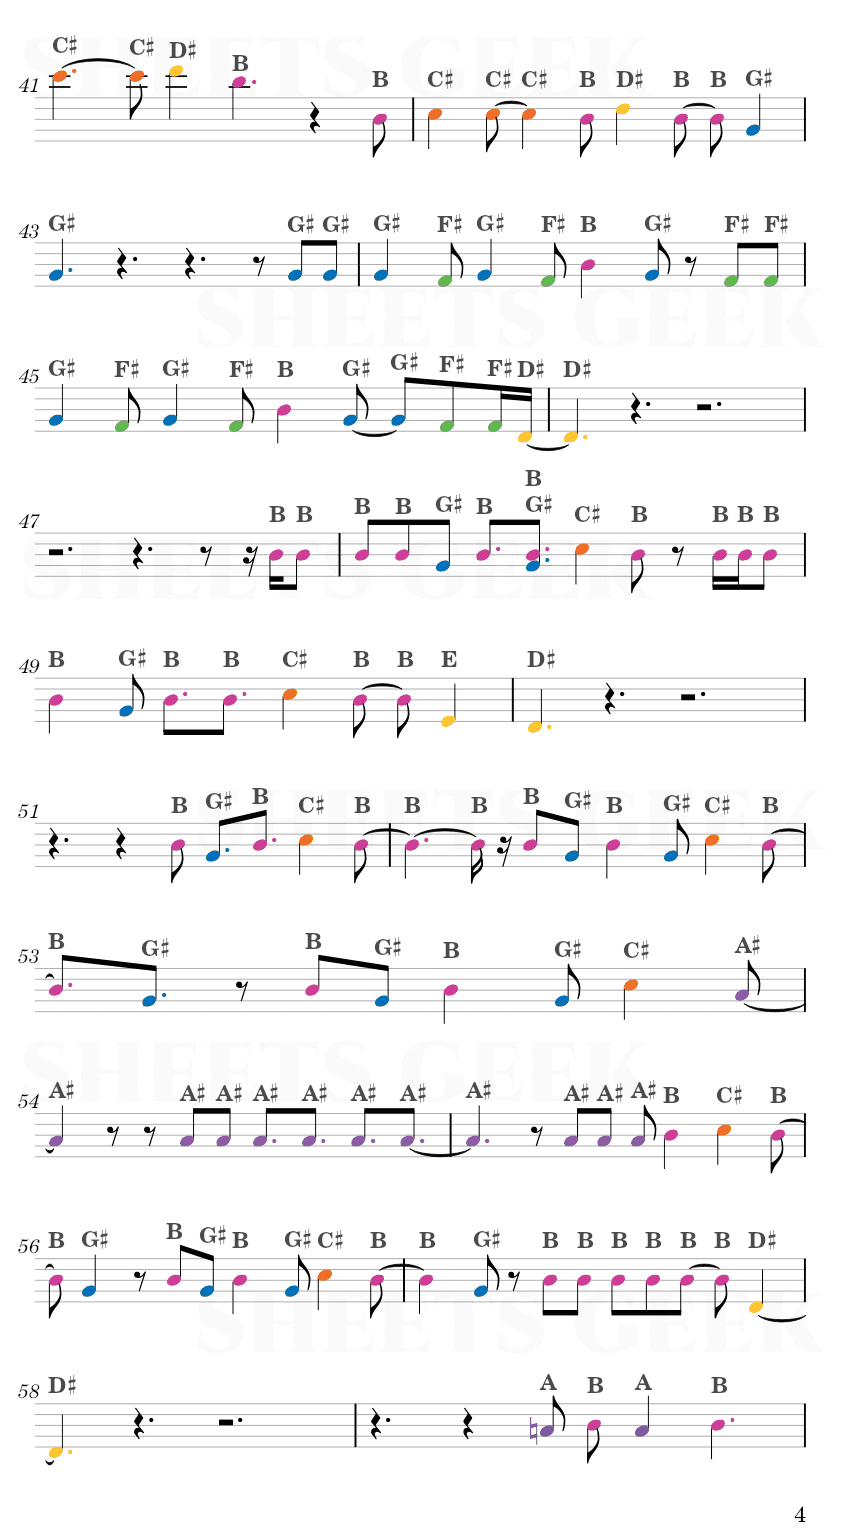 Shiver - Coldplay Easy Sheet Music Free for piano, keyboard, flute, violin, sax, cello page 4